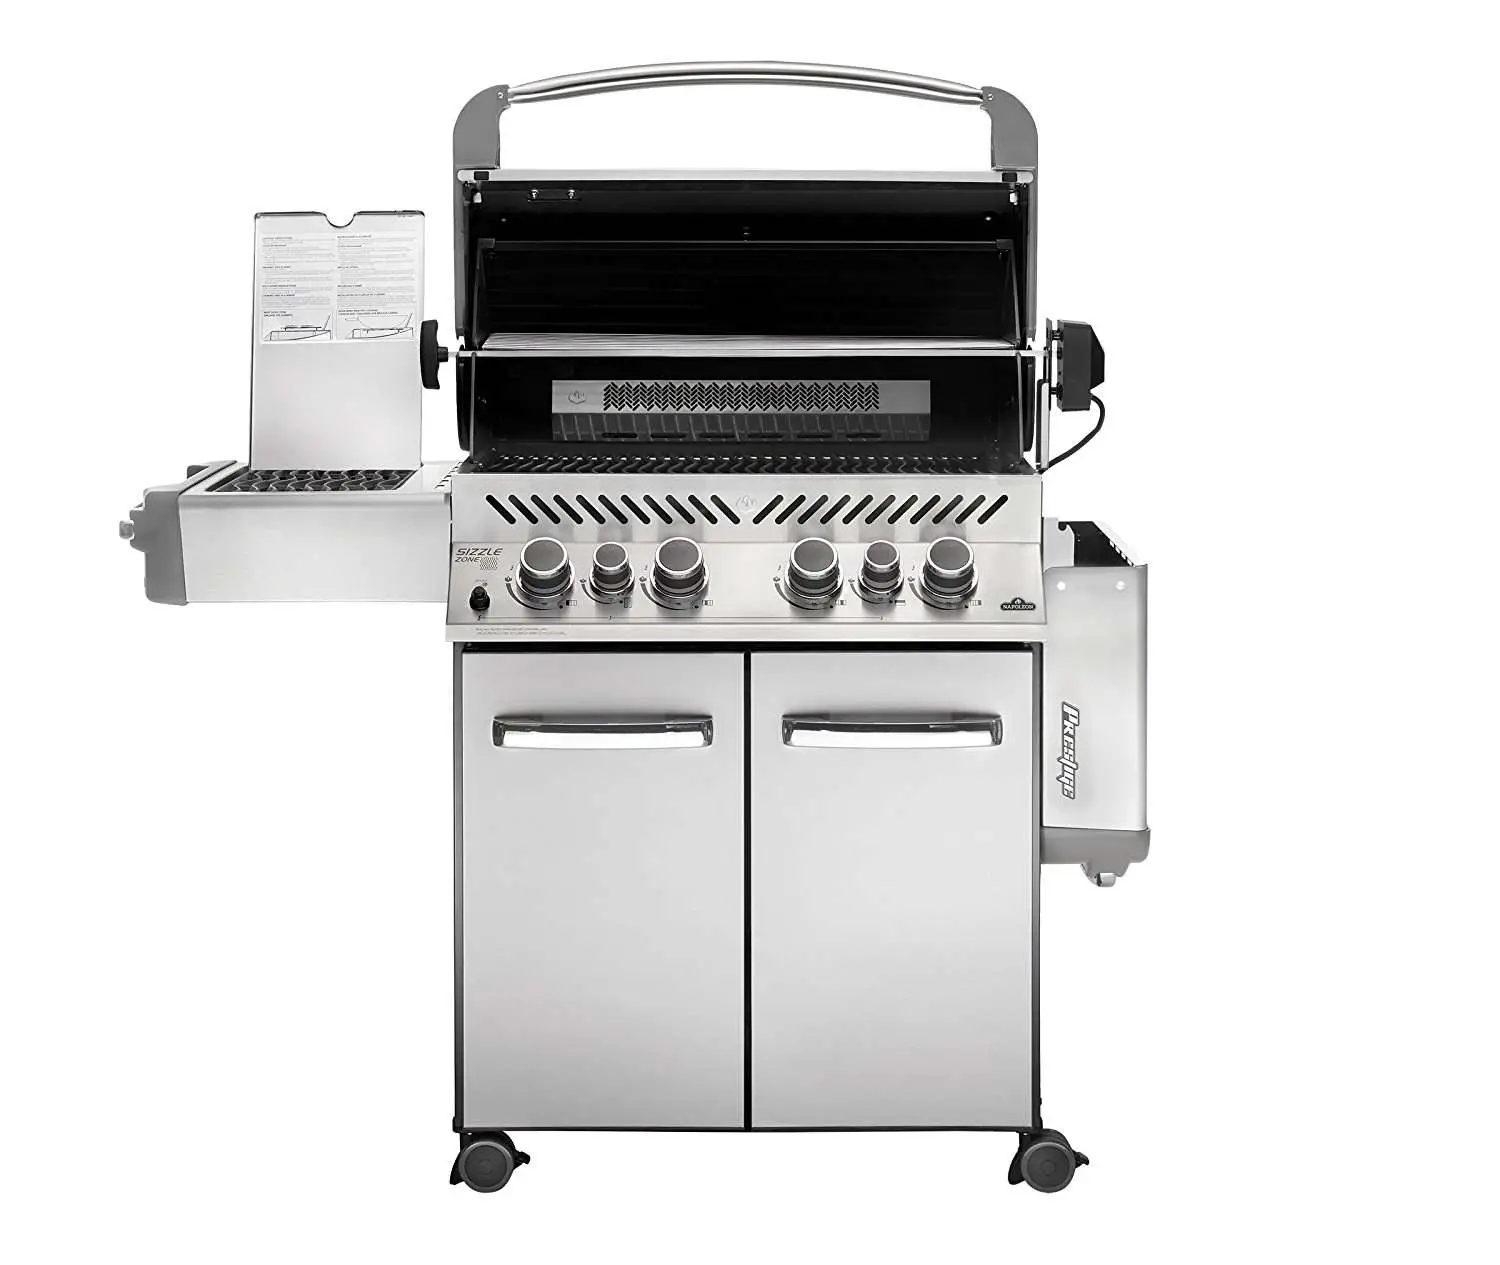 The Best Rated Gas Grills of 2020